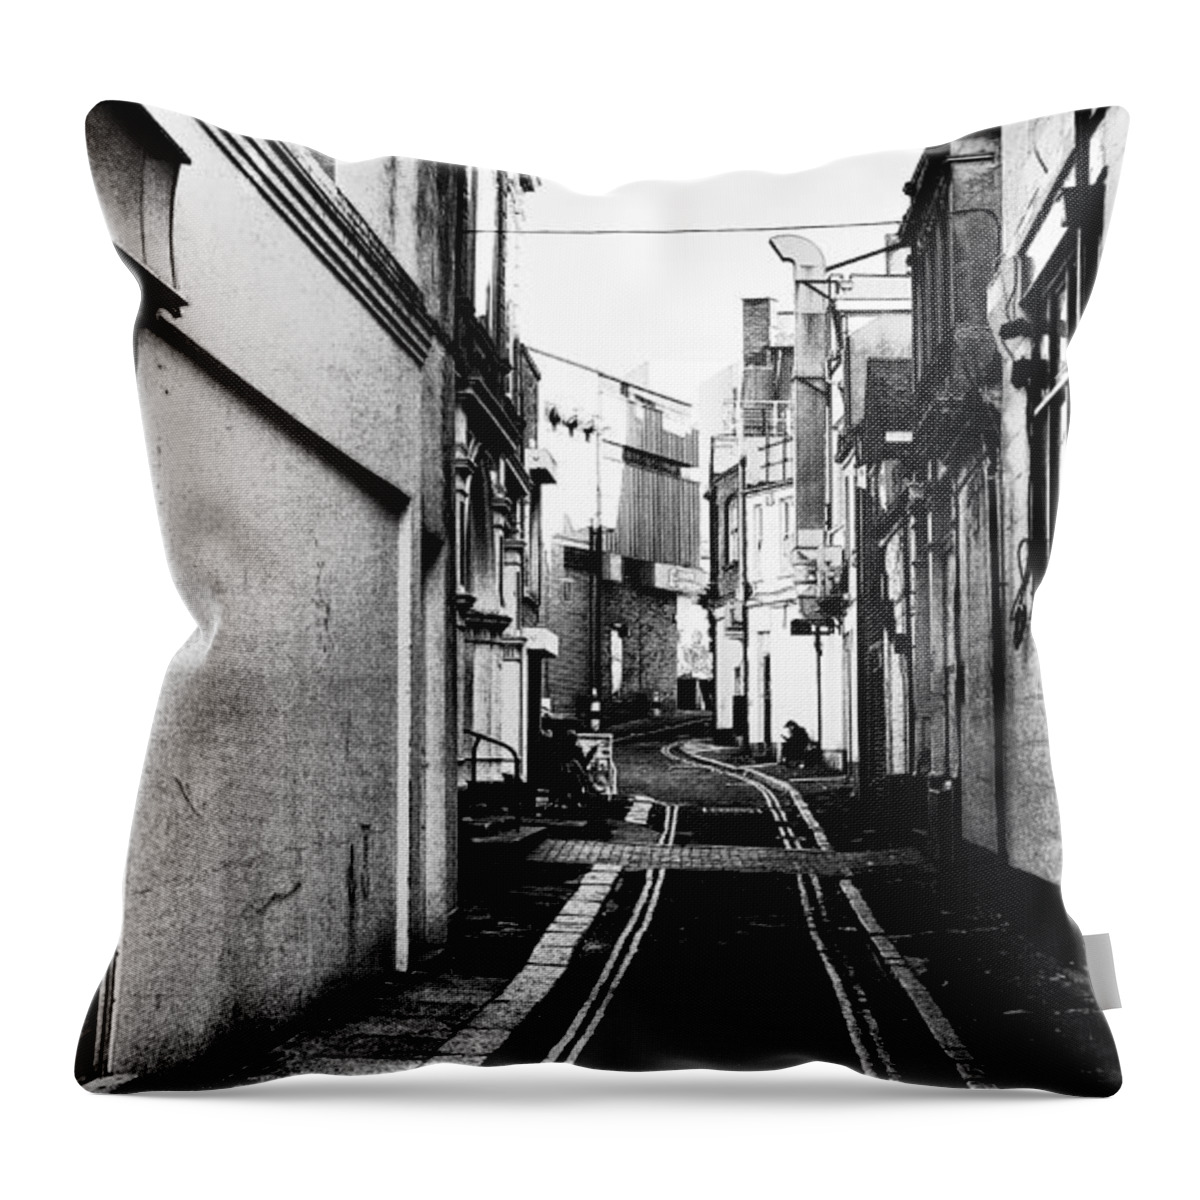 Street Photography Throw Pillow featuring the photograph Backstreet by Pedro Fernandez